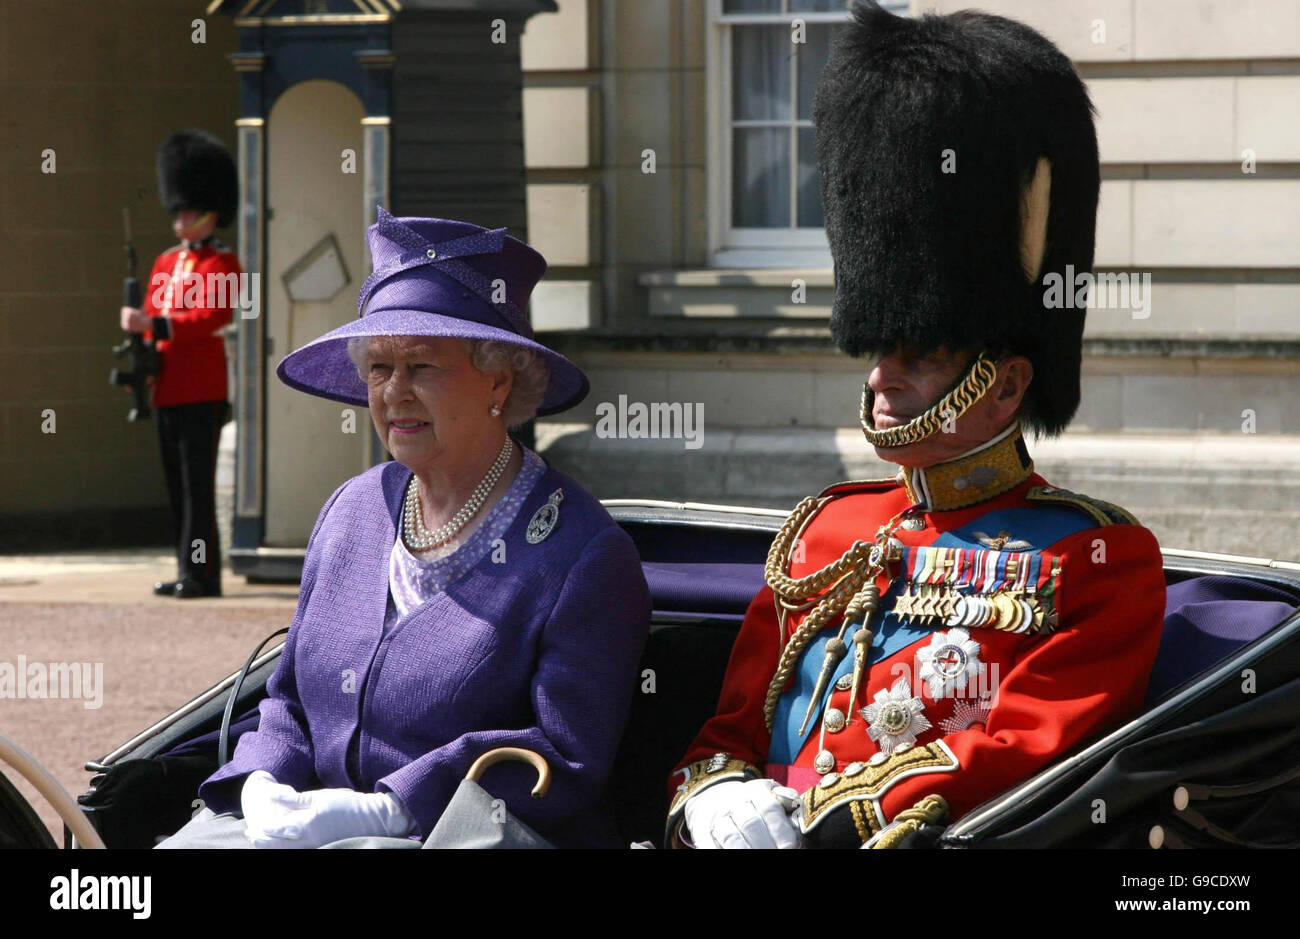 Britain's Queen Elizabeth II and the Duke of Edinburgh leave Buckingham Palace, London, to watch the annual Trooping the Colour ceremony as she celebrates her official 80th birthday. PRESS ASSOCIATION Photo, Picture date: Saturday June 17, 2006. More than 1,100 soldiers will take part in the colourful annual display of pomp and pageantry. See PA story ROYAL Queen. Photo credit should read: Chris Young/WPA rota/PA. Stock Photo